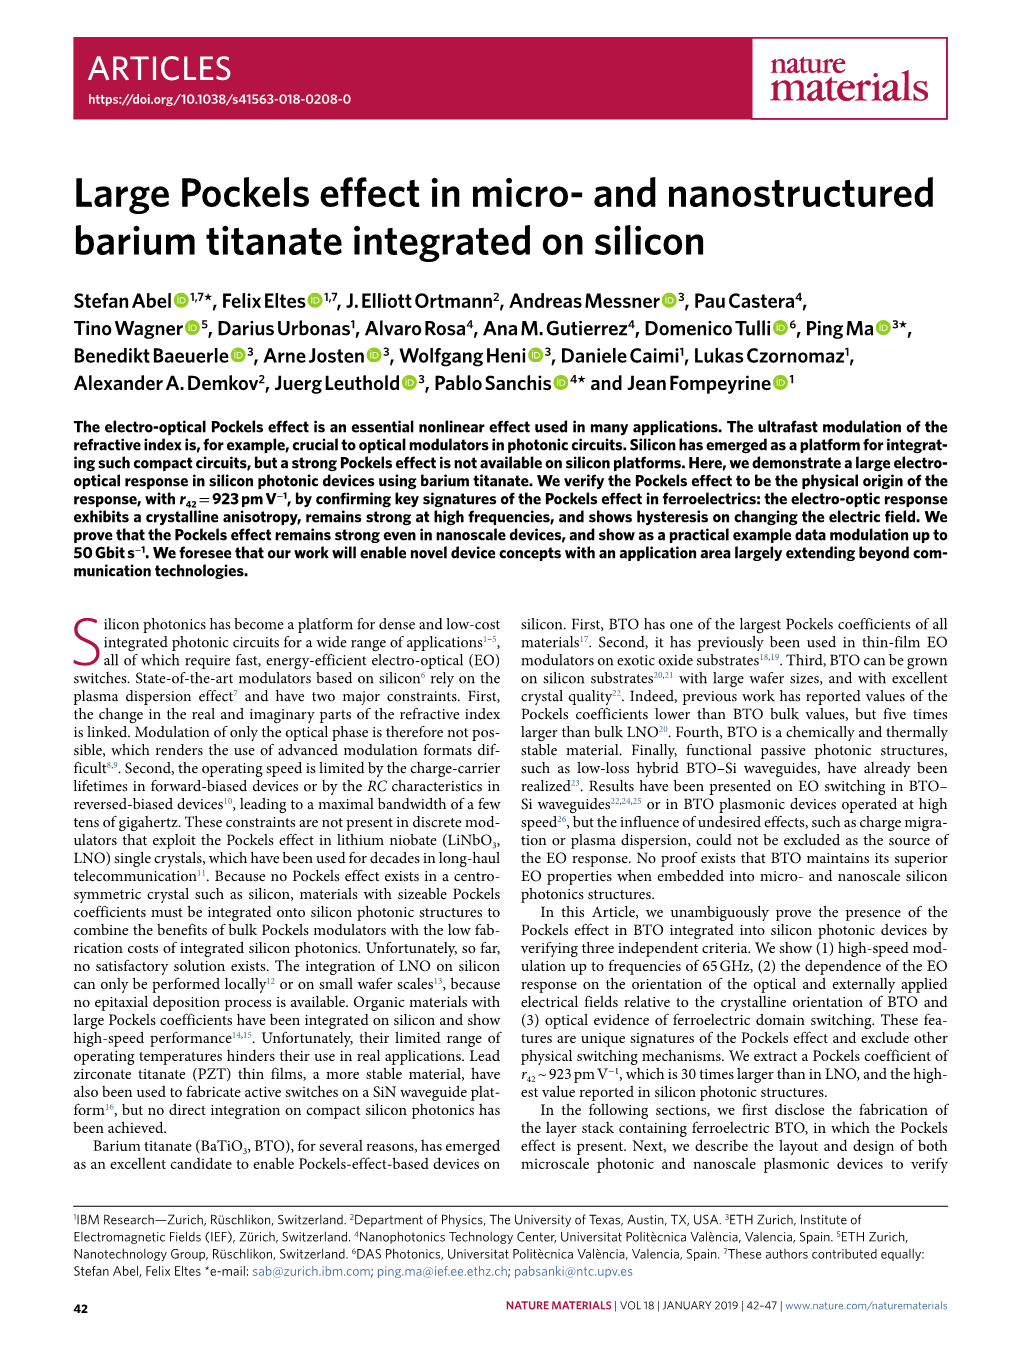 Large Pockels Effect in Micro- and Nanostructured Barium Titanate Integrated on Silicon